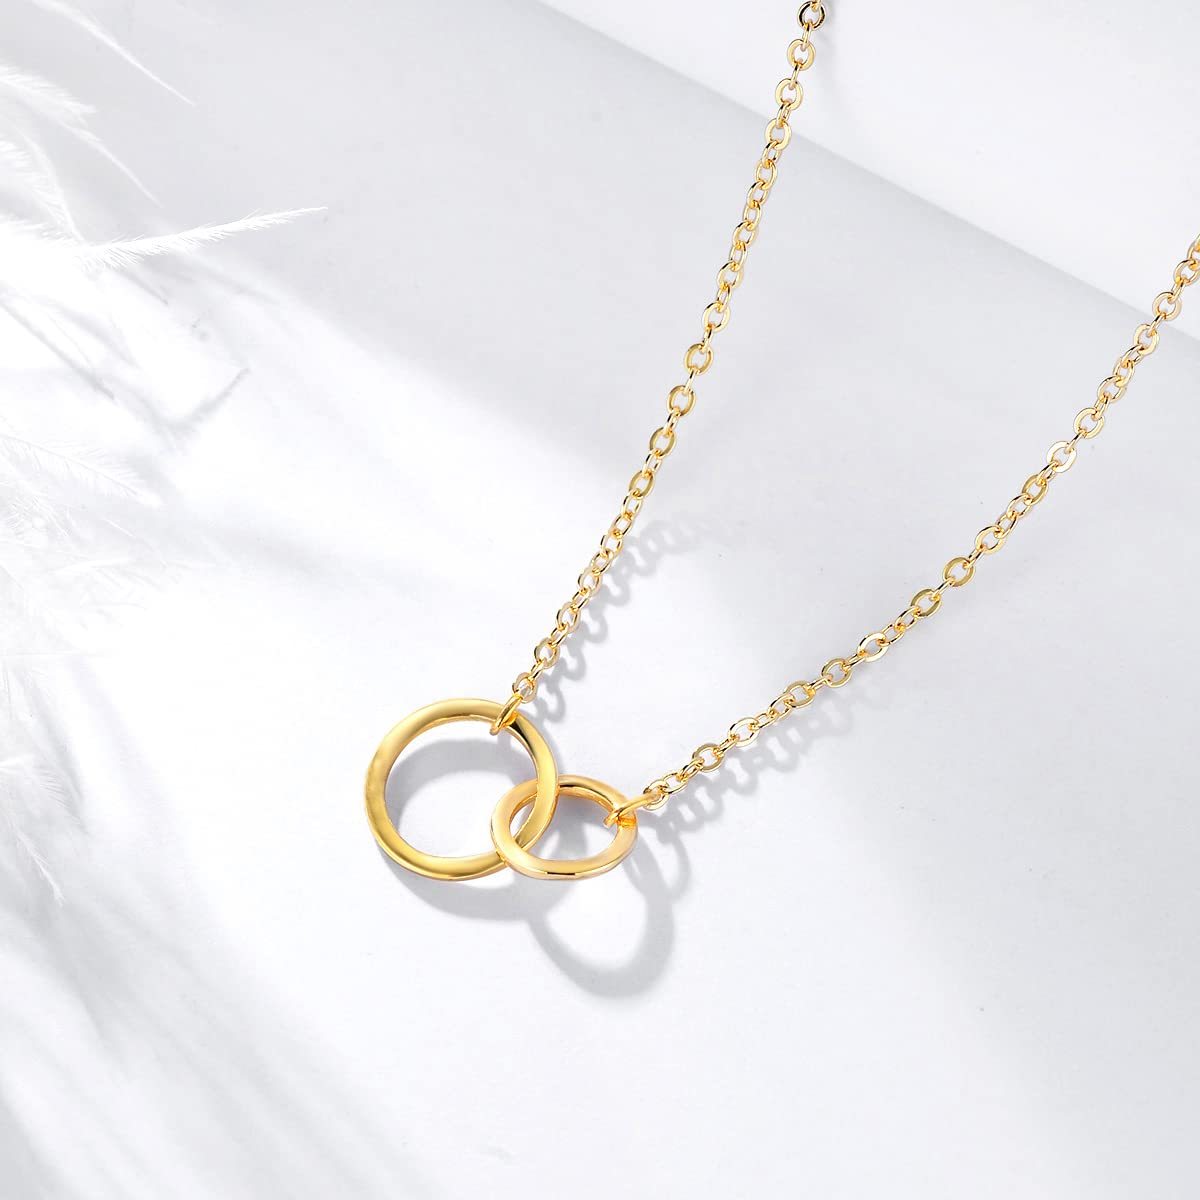 Decent 14K Gold Plated Interlocking Circle Necklace Cute Dainty Harmmered Karma Friendship Pendant Necklace